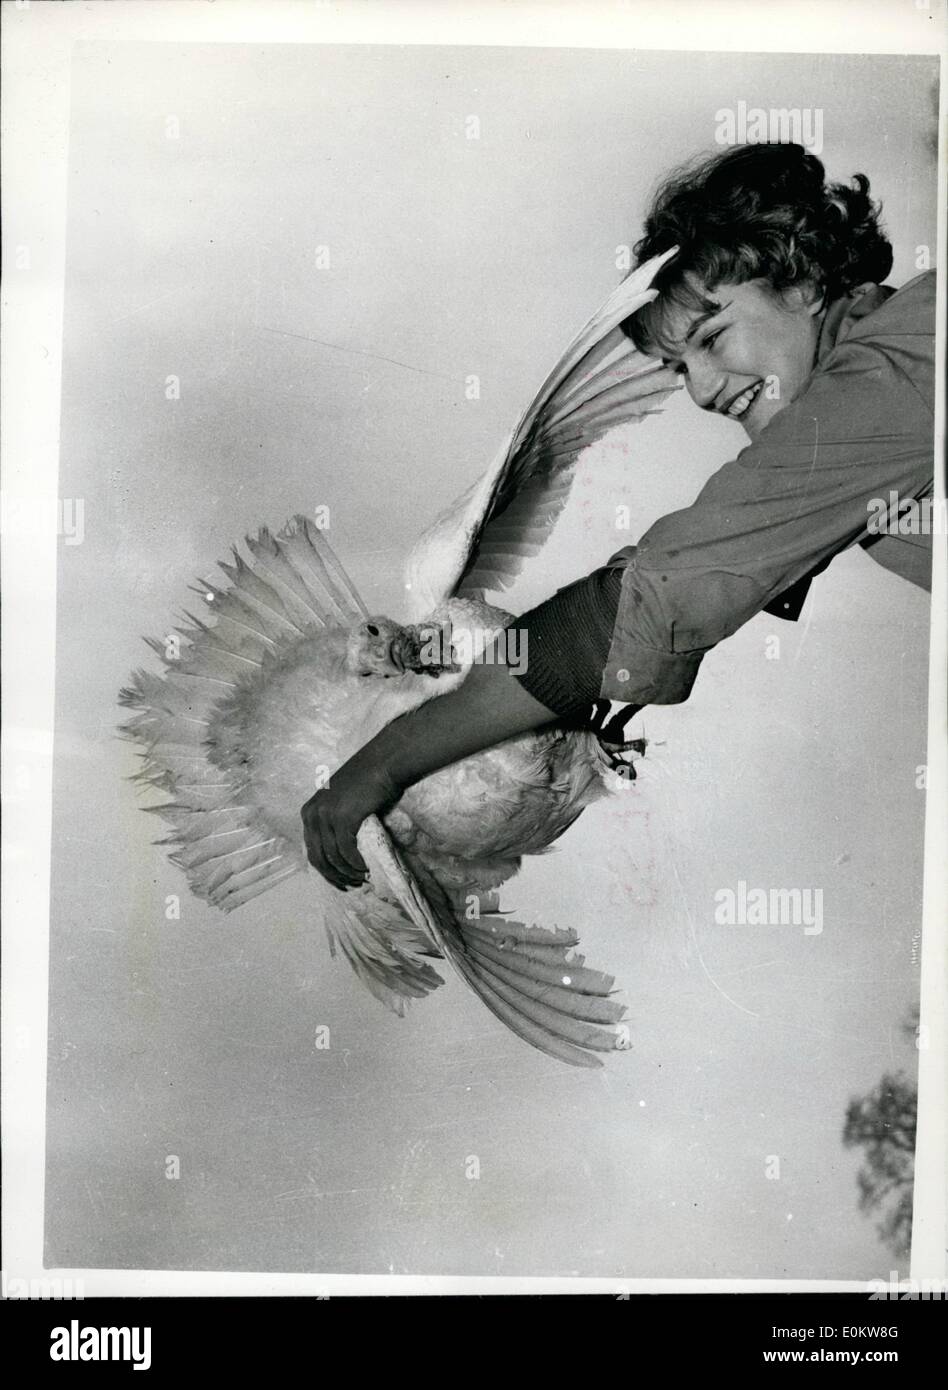 Sep. 09, 1951 - He is a Cracker - is this Turkey.... A Prize Christmas Dinner for Somebody: Twenty one year old Joanna Morton - Stock Photo